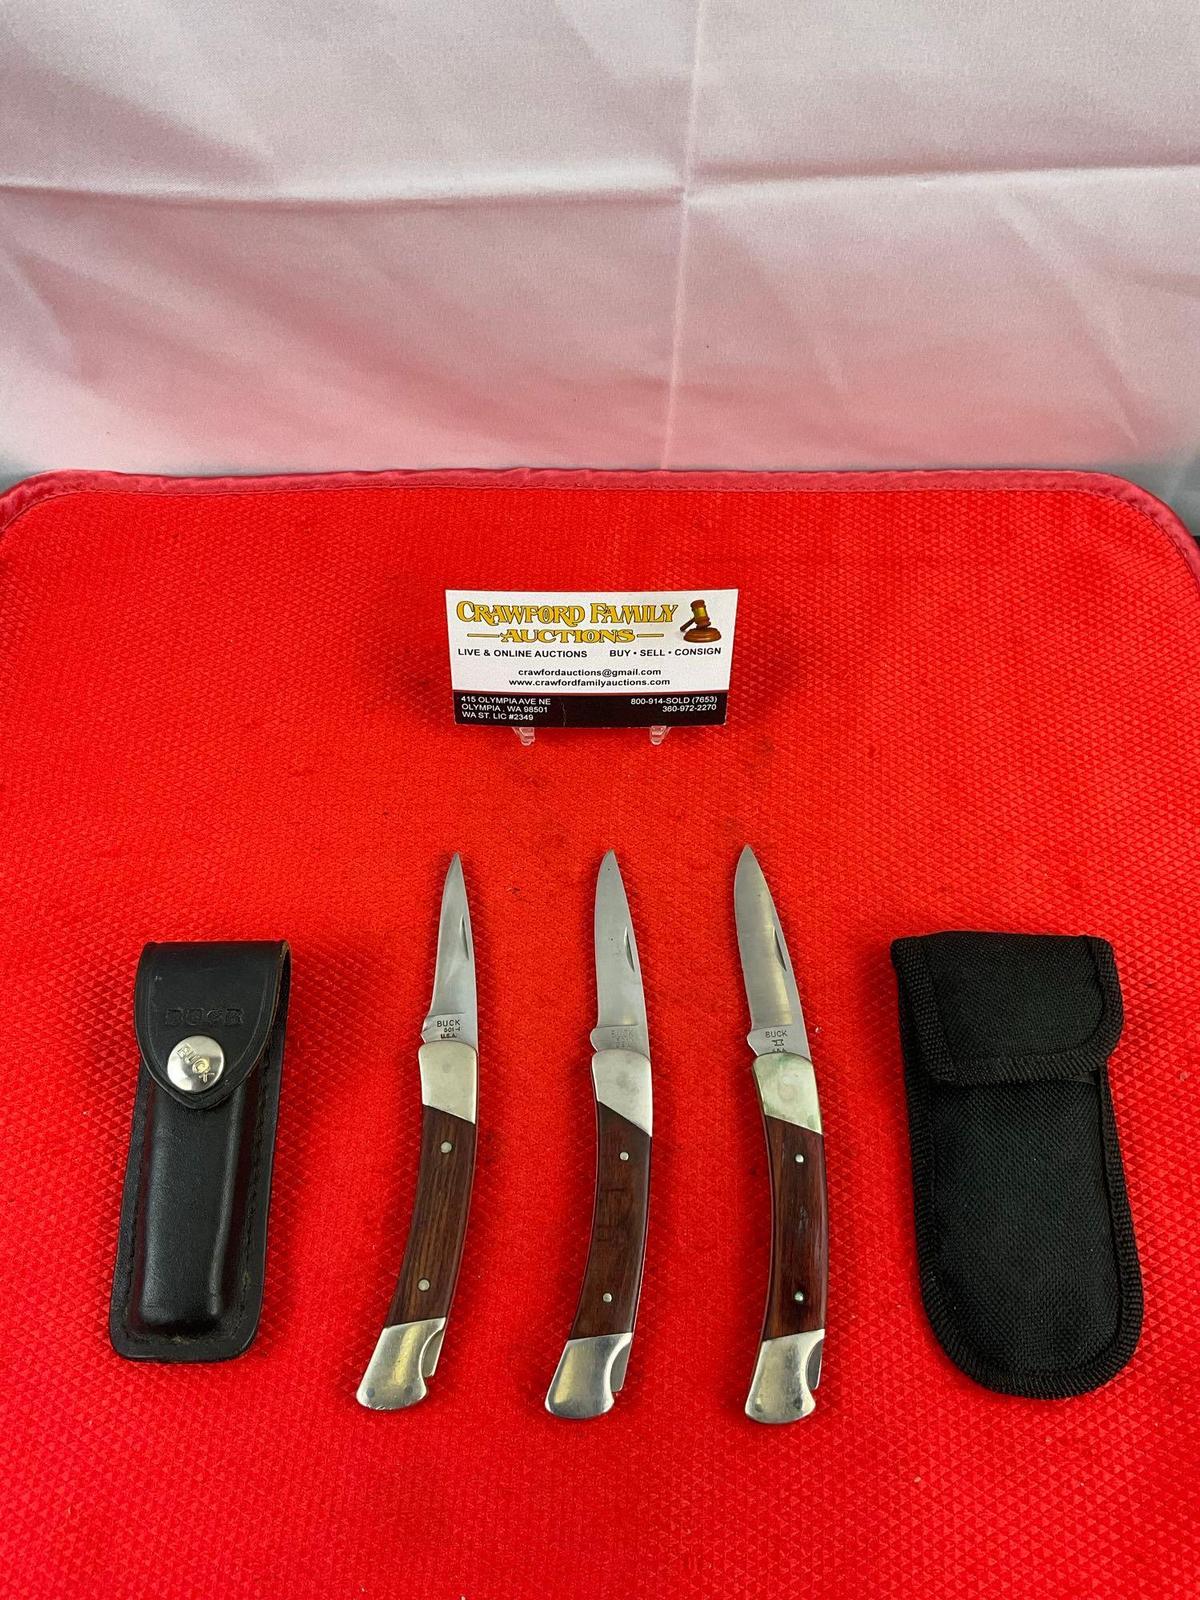 3 pcs Buck 2.5" Steel Folding Blade Pocket Knives Model 501 Squire w/ 2 Sheathes. See pics.